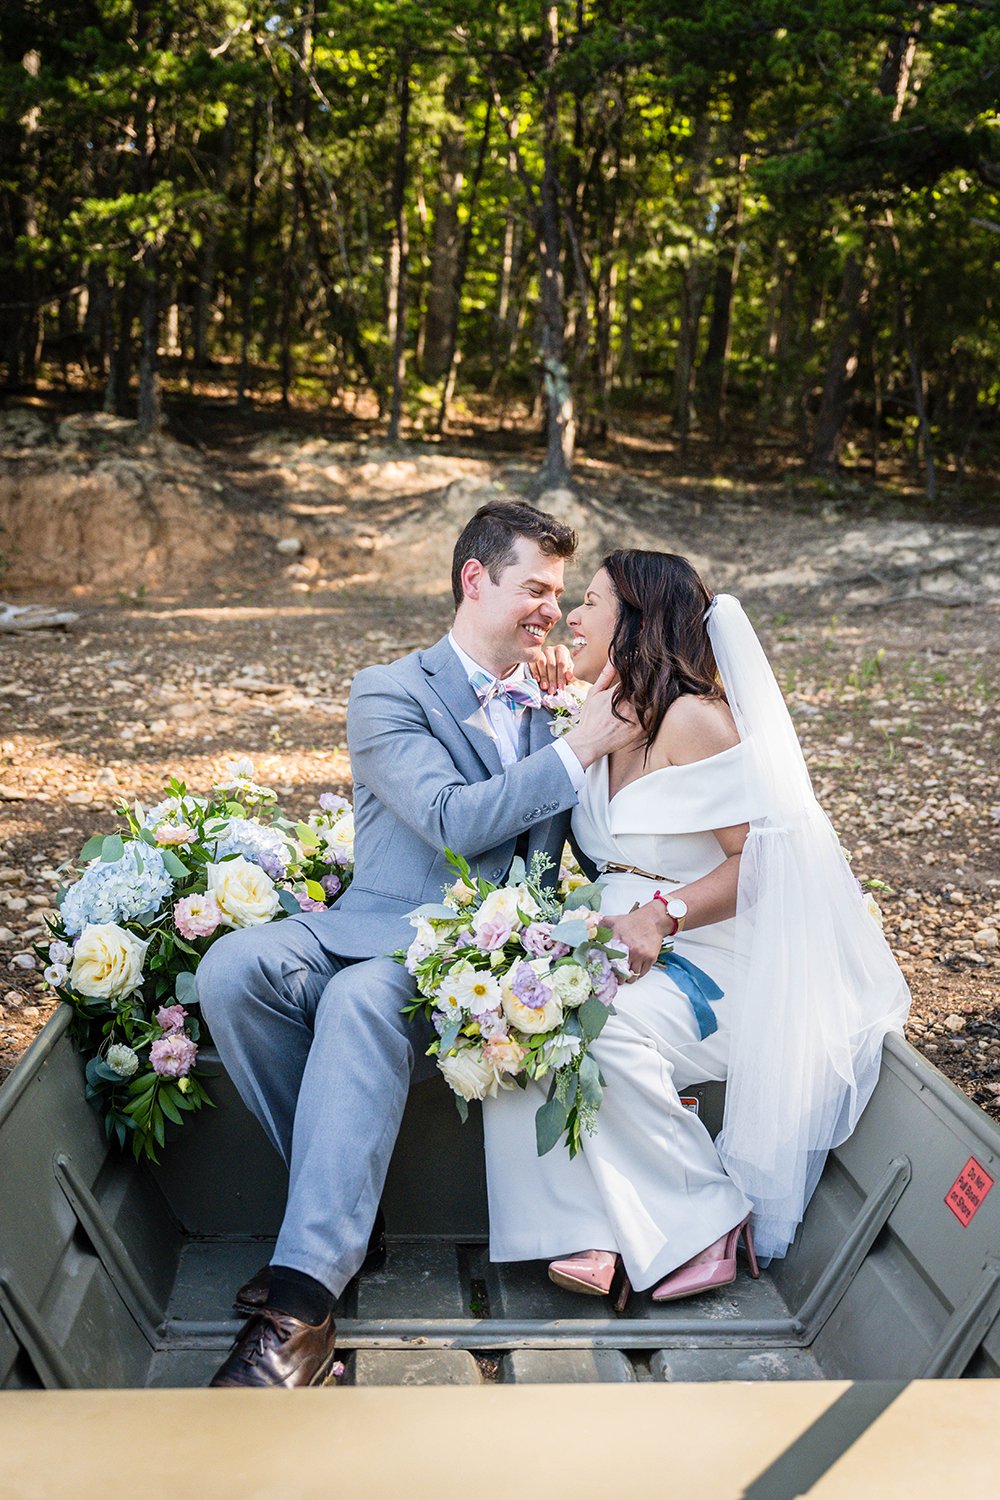 A newlywed couple sits together and holds onto one another laughing in a rowboat adorned with pastel flowers on the shores of Carvin's Cove.